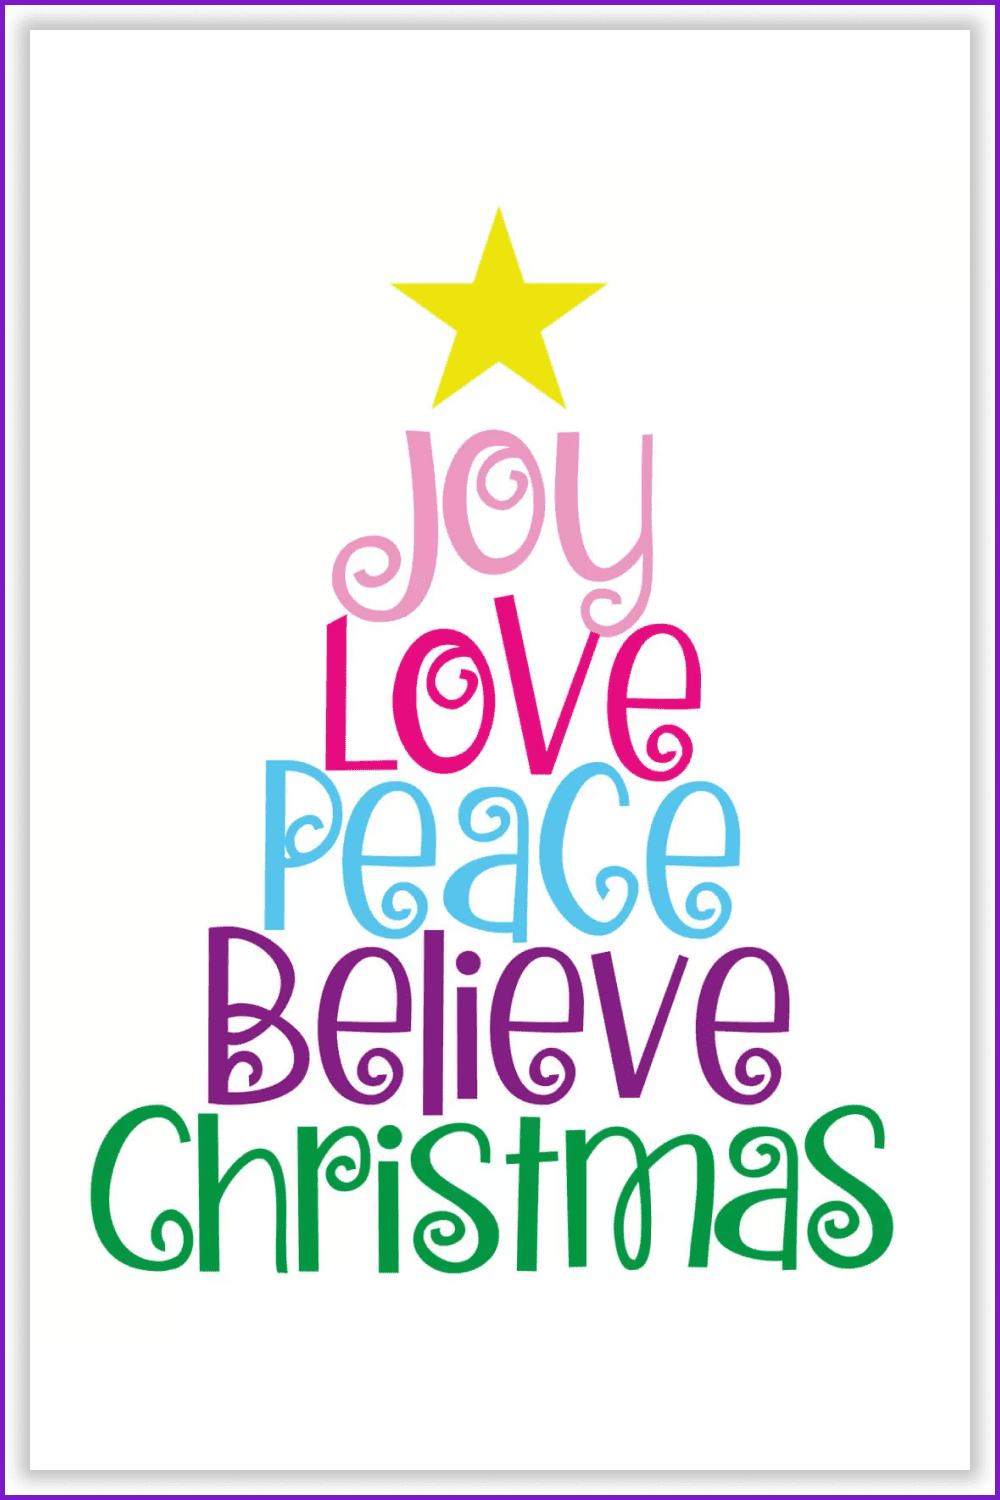 Christmas tree made from colorful words Joy Love Peace Believe Christmas.